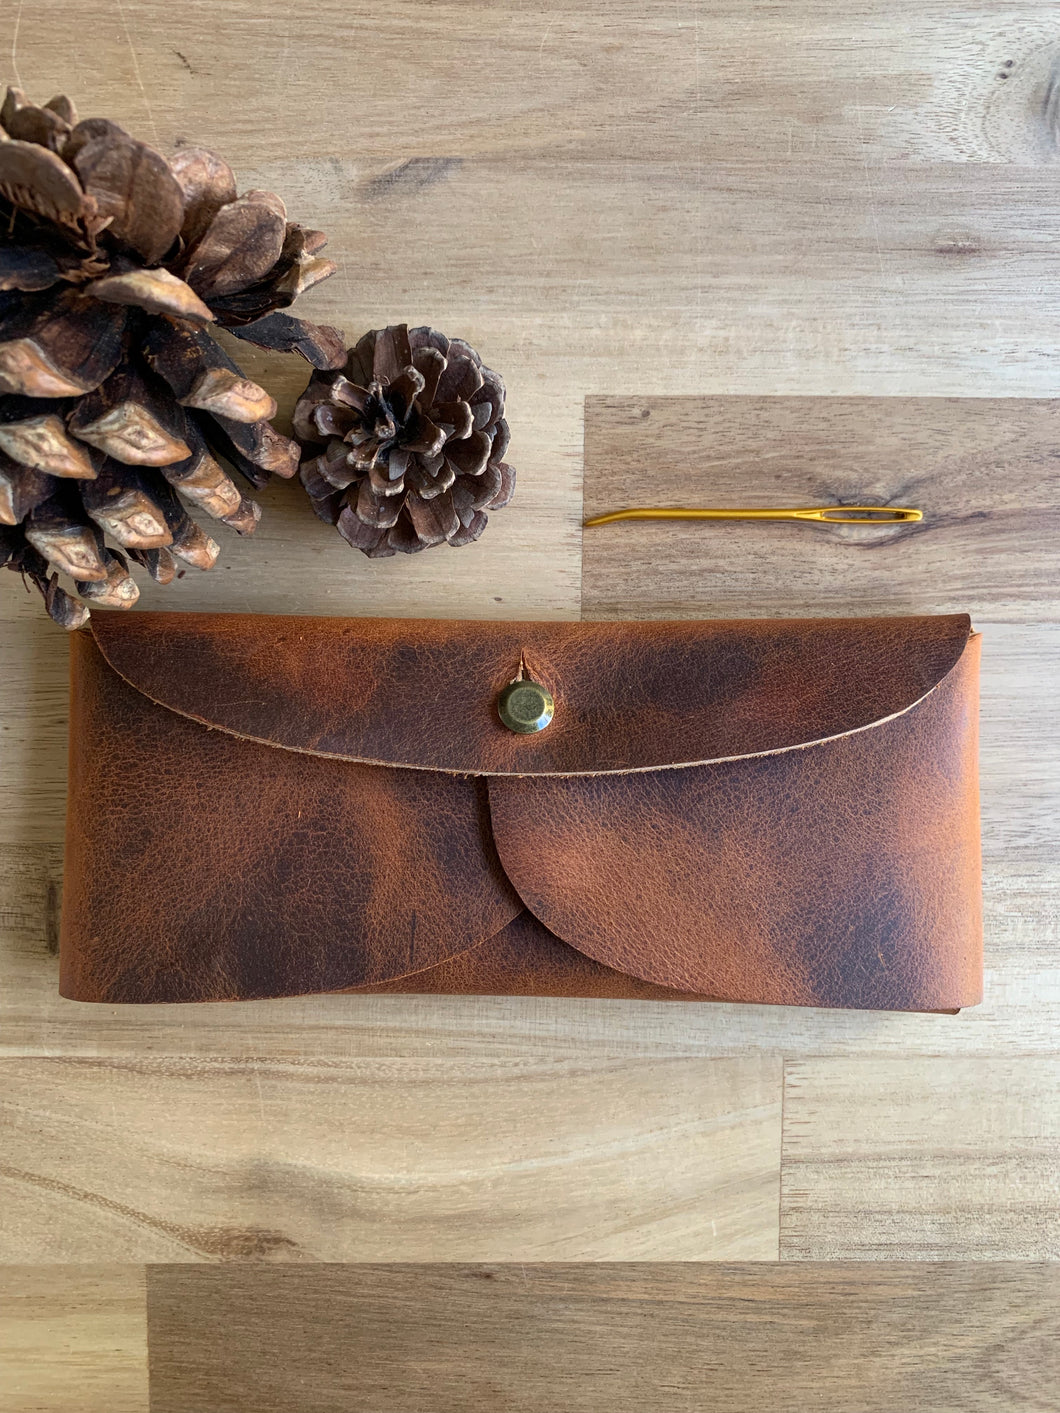 A rectangular leather pouch in lighter and darker patina leather with two curved sides and a rounded flap, held together with a brass clasp. Pinecones lie nearby.